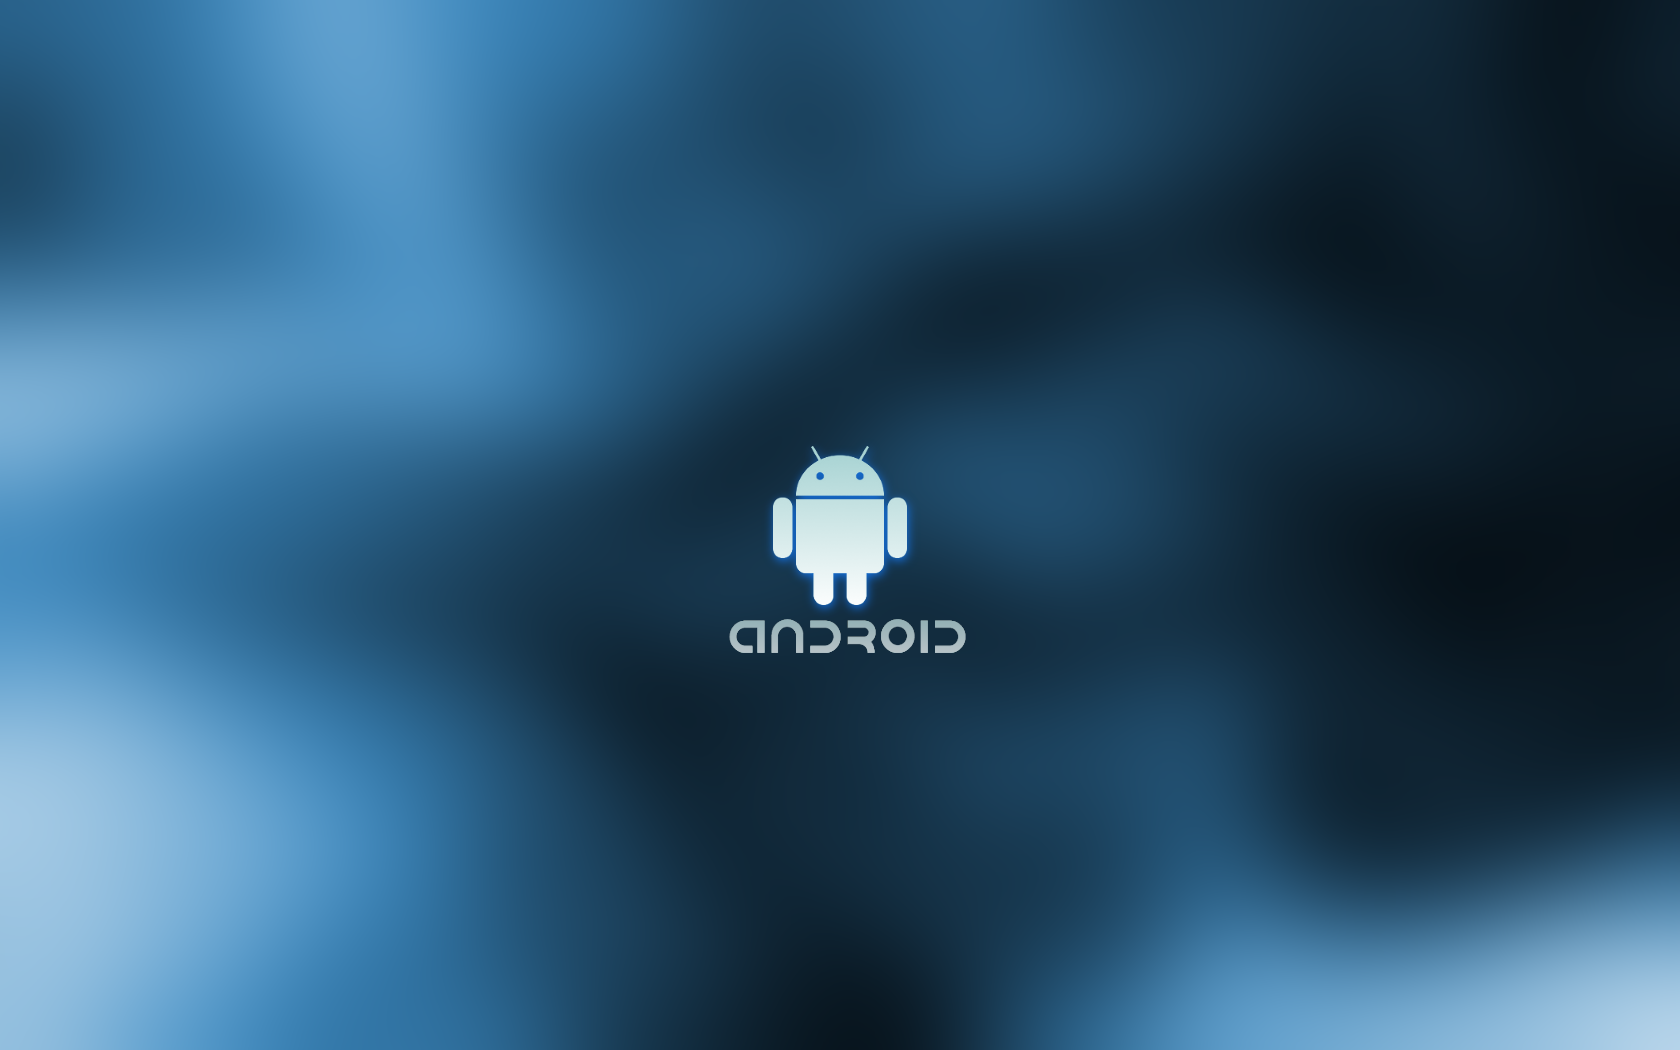 New Blue And Black Android Wallpaper Background With